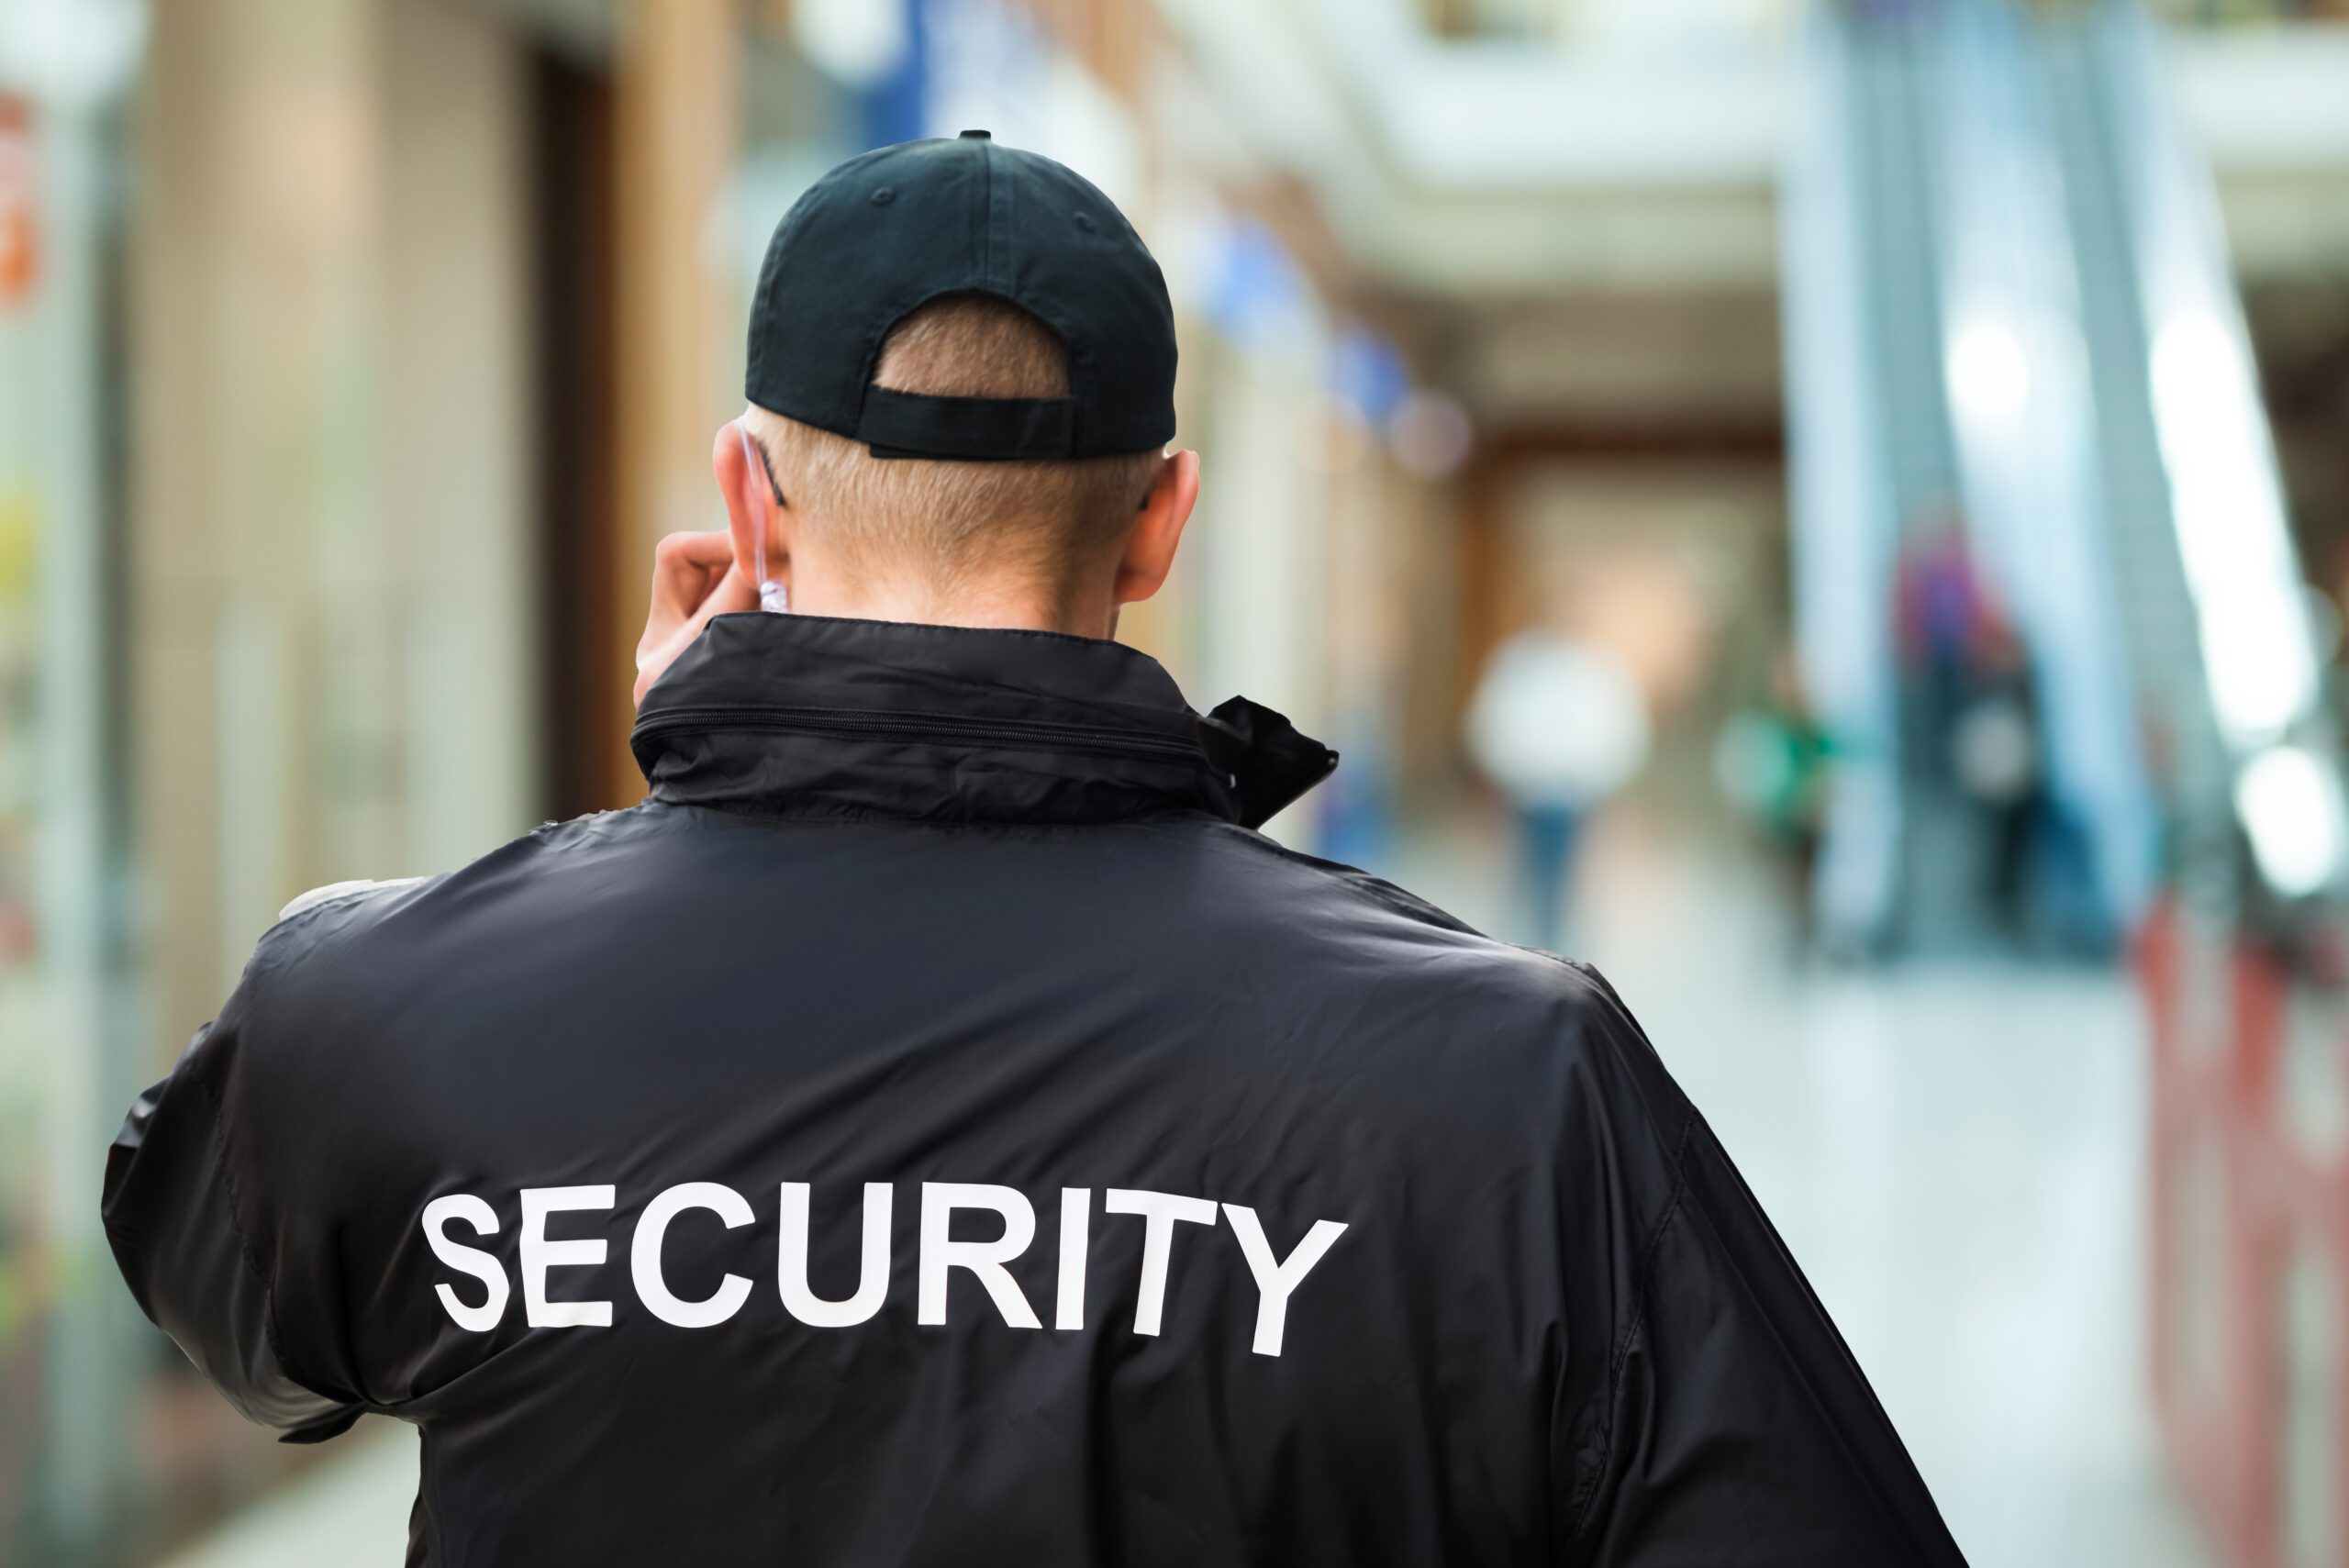 The different types of security risks faced by UK retail stores